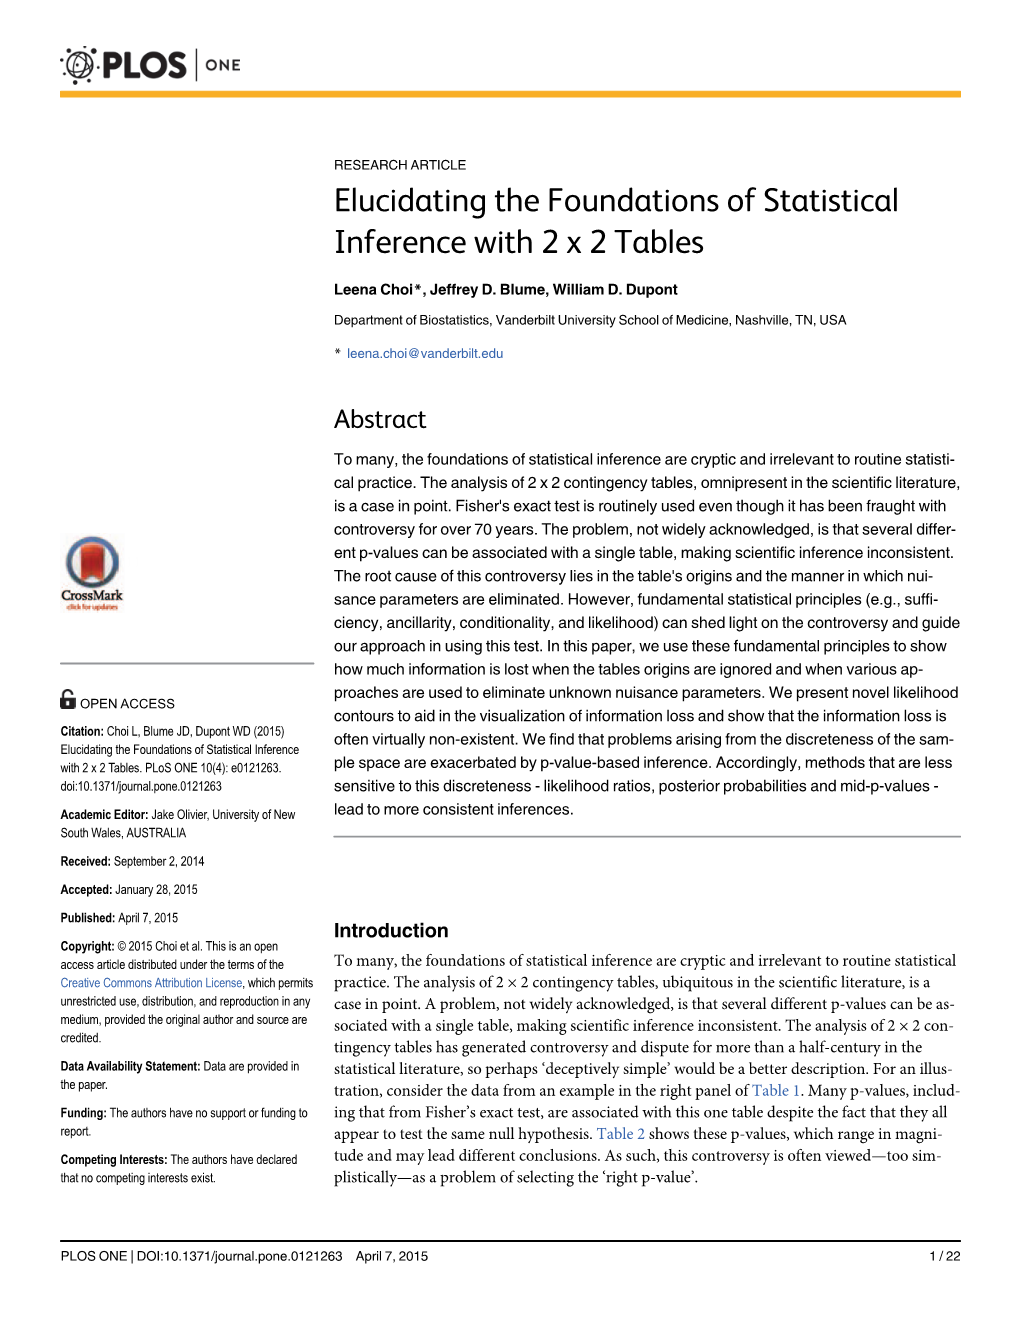 Elucidating the Foundations of Statistical Inference with 2 X 2 Tables